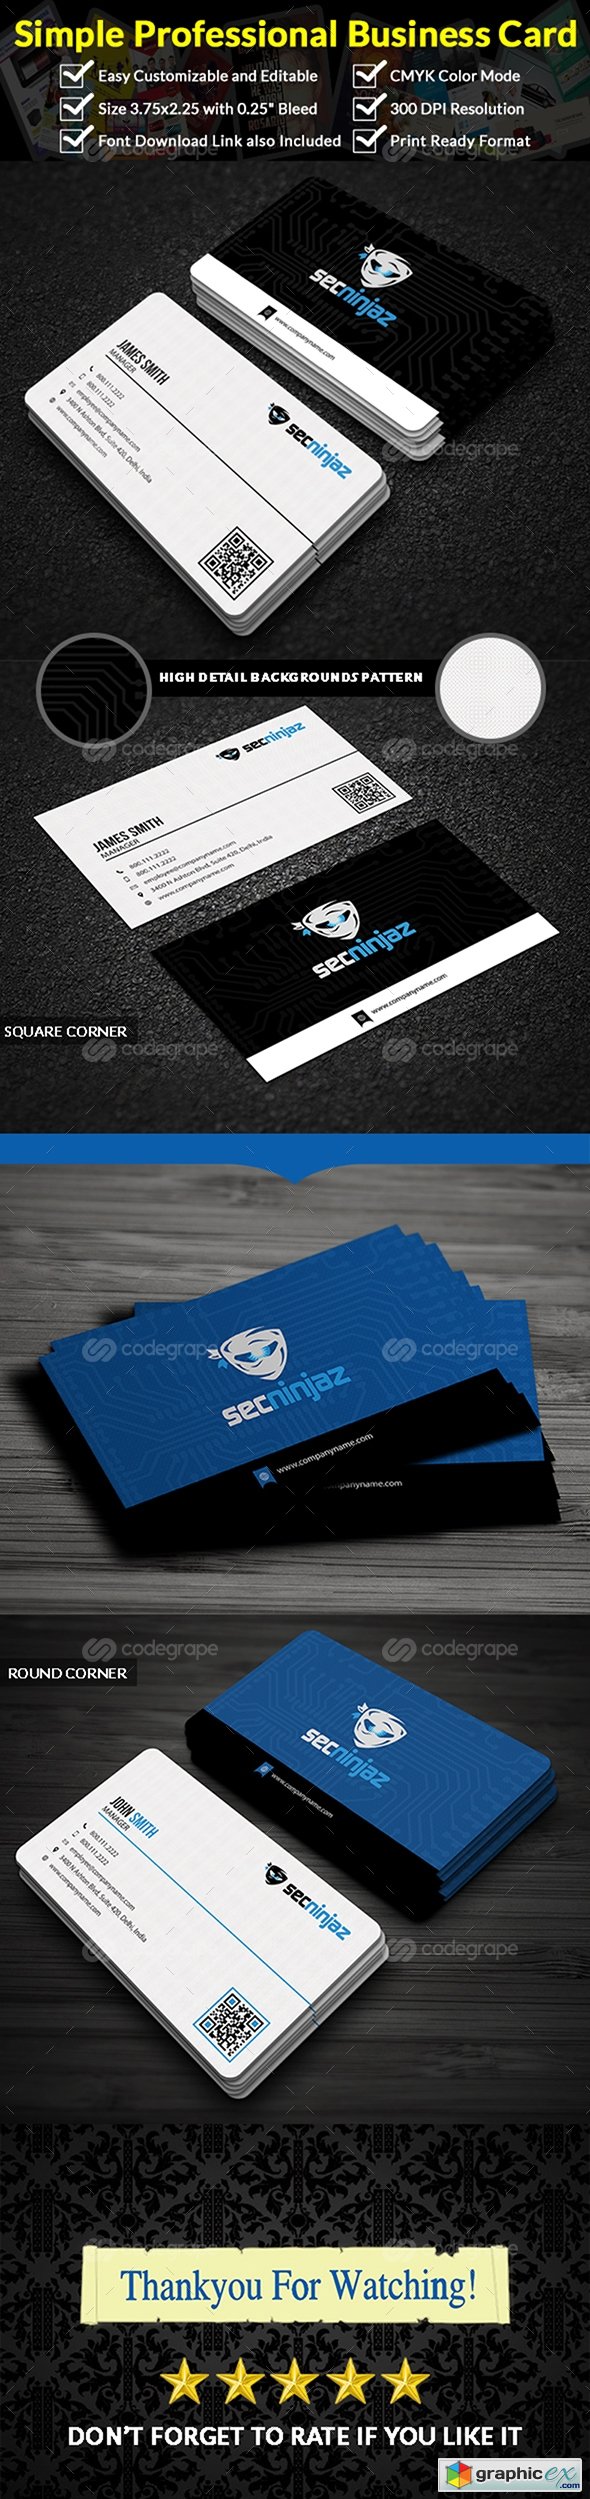 Professional Business Card 11498